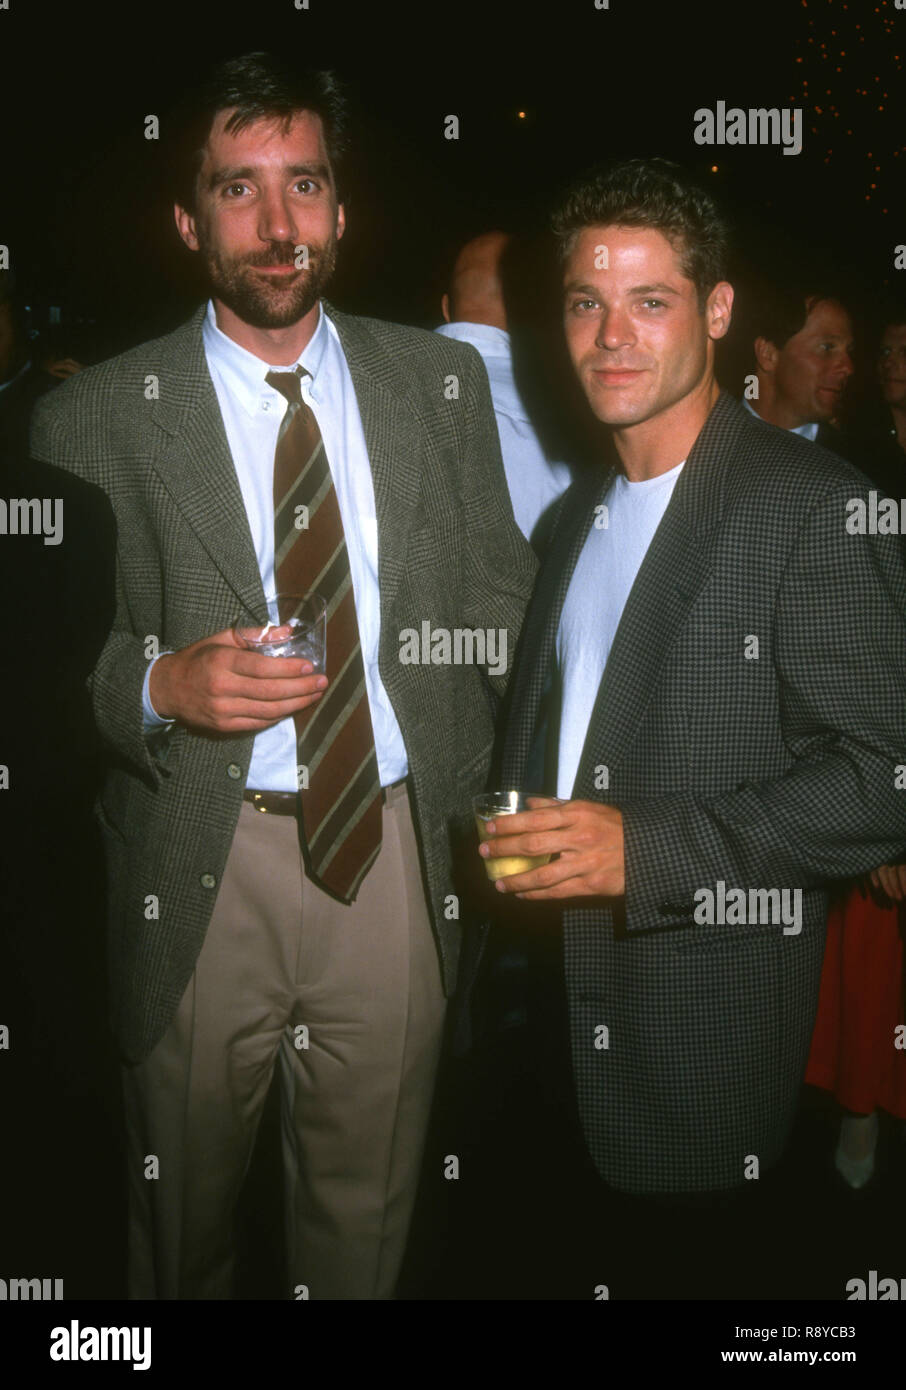 WEST HOLLYWOOD, CA - APRIL 29: Agent Brian Swardstrom and actor David Barry Gray attend the 'Three of Hearts' West Hollywood Premiere on April 29, 1993 at the DGA Theater in West Hollywood, California. Photo by Barry King/Alamy Stock Photo Stock Photo